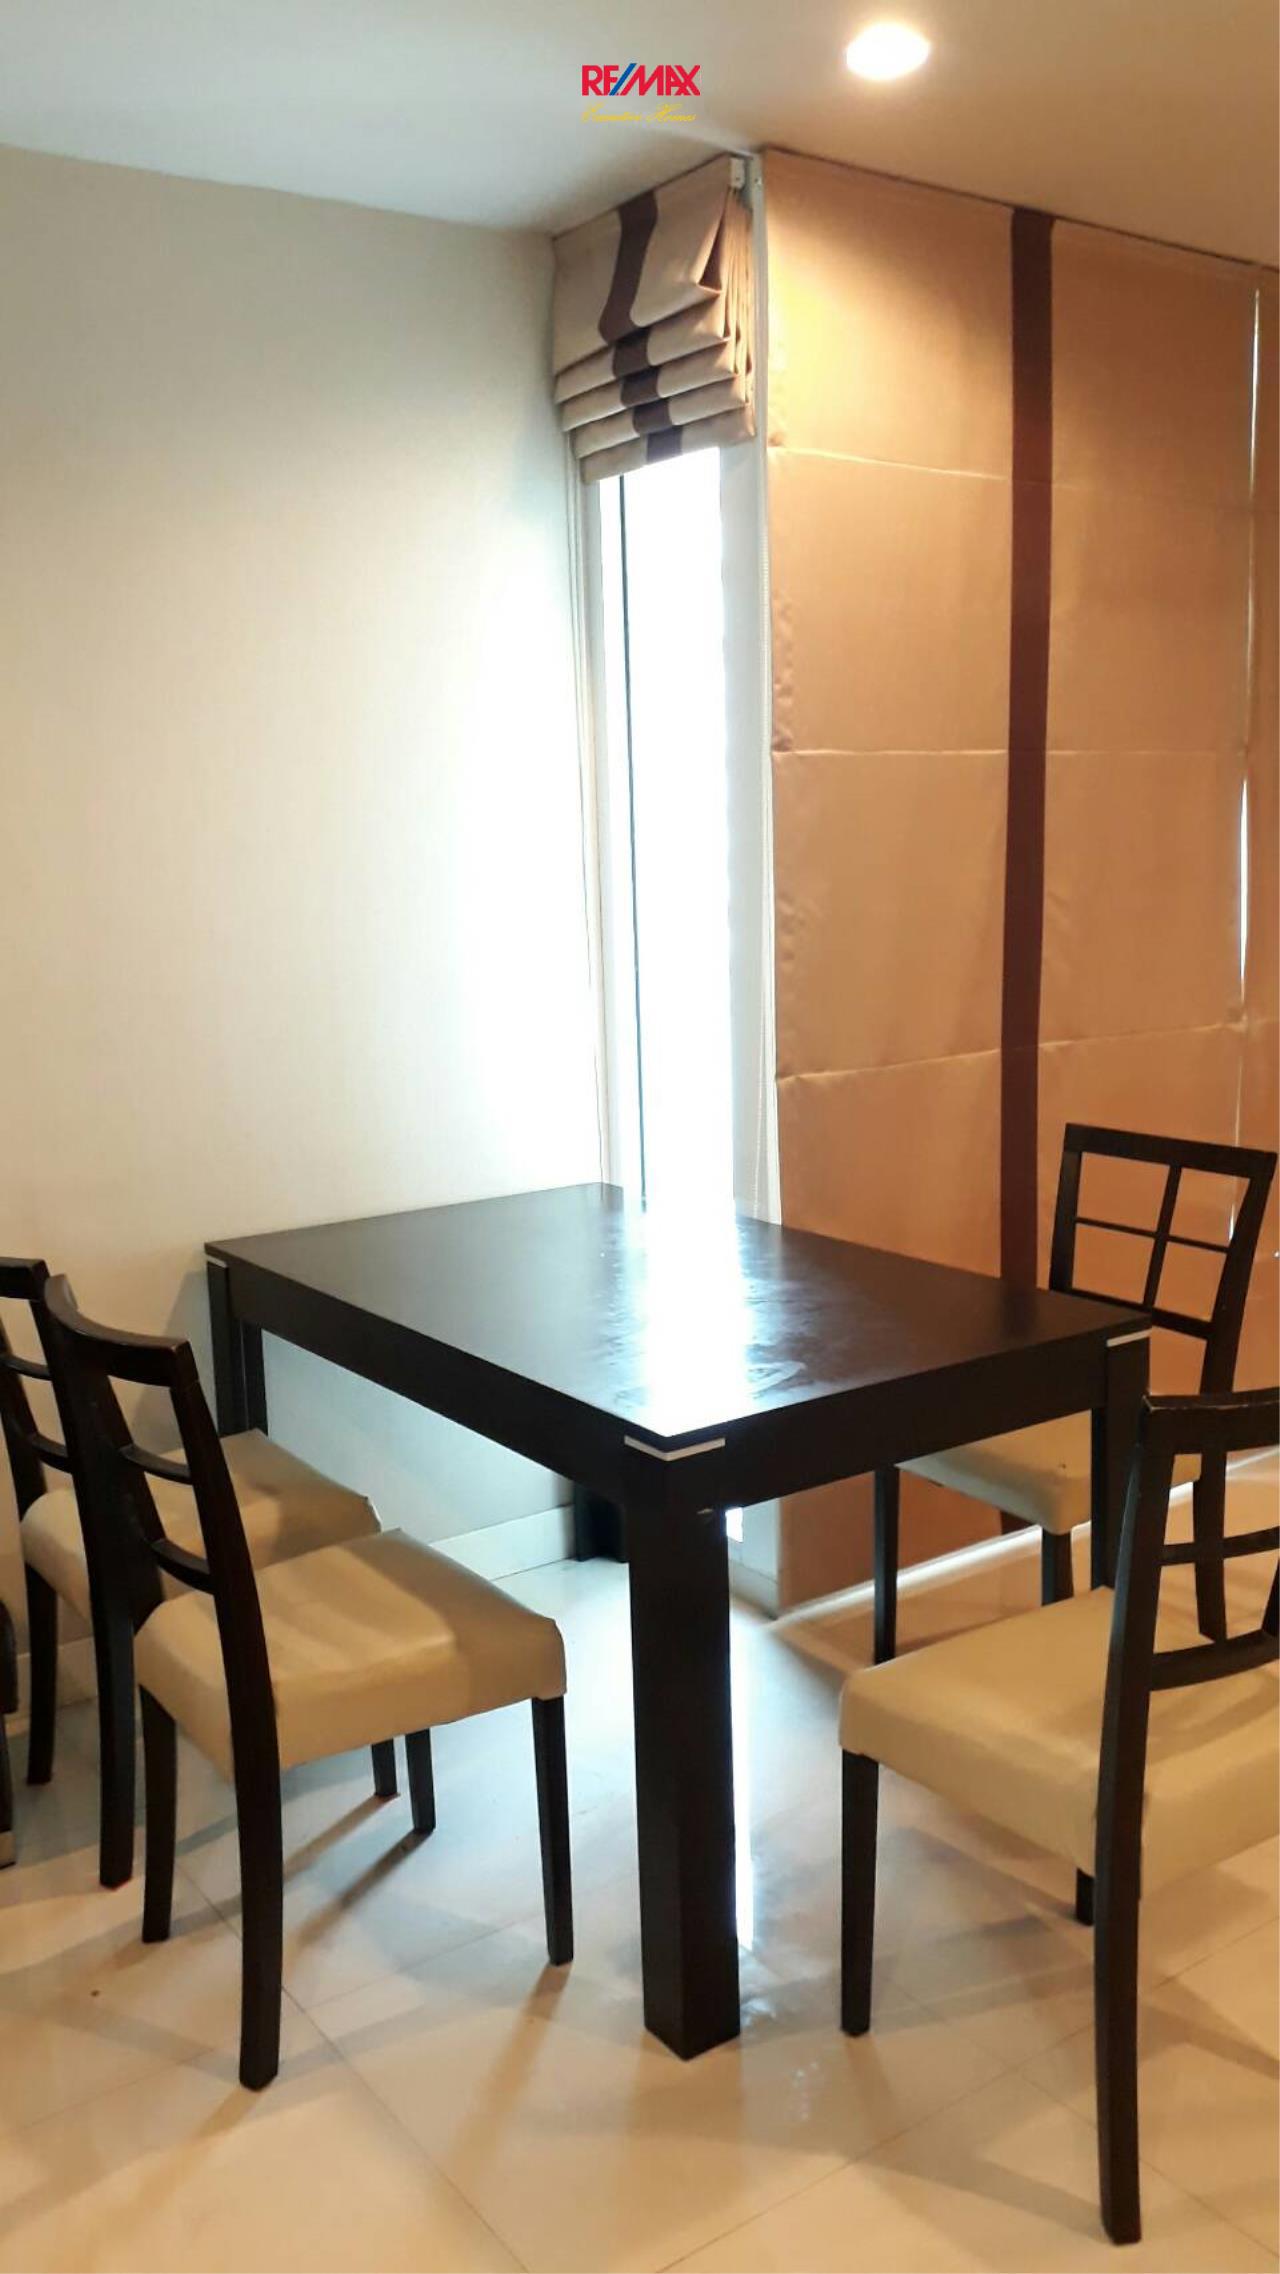 RE/MAX Executive Homes Agency's Spacious 1 Bedroom for Rent Sukhumvit Living Town 3